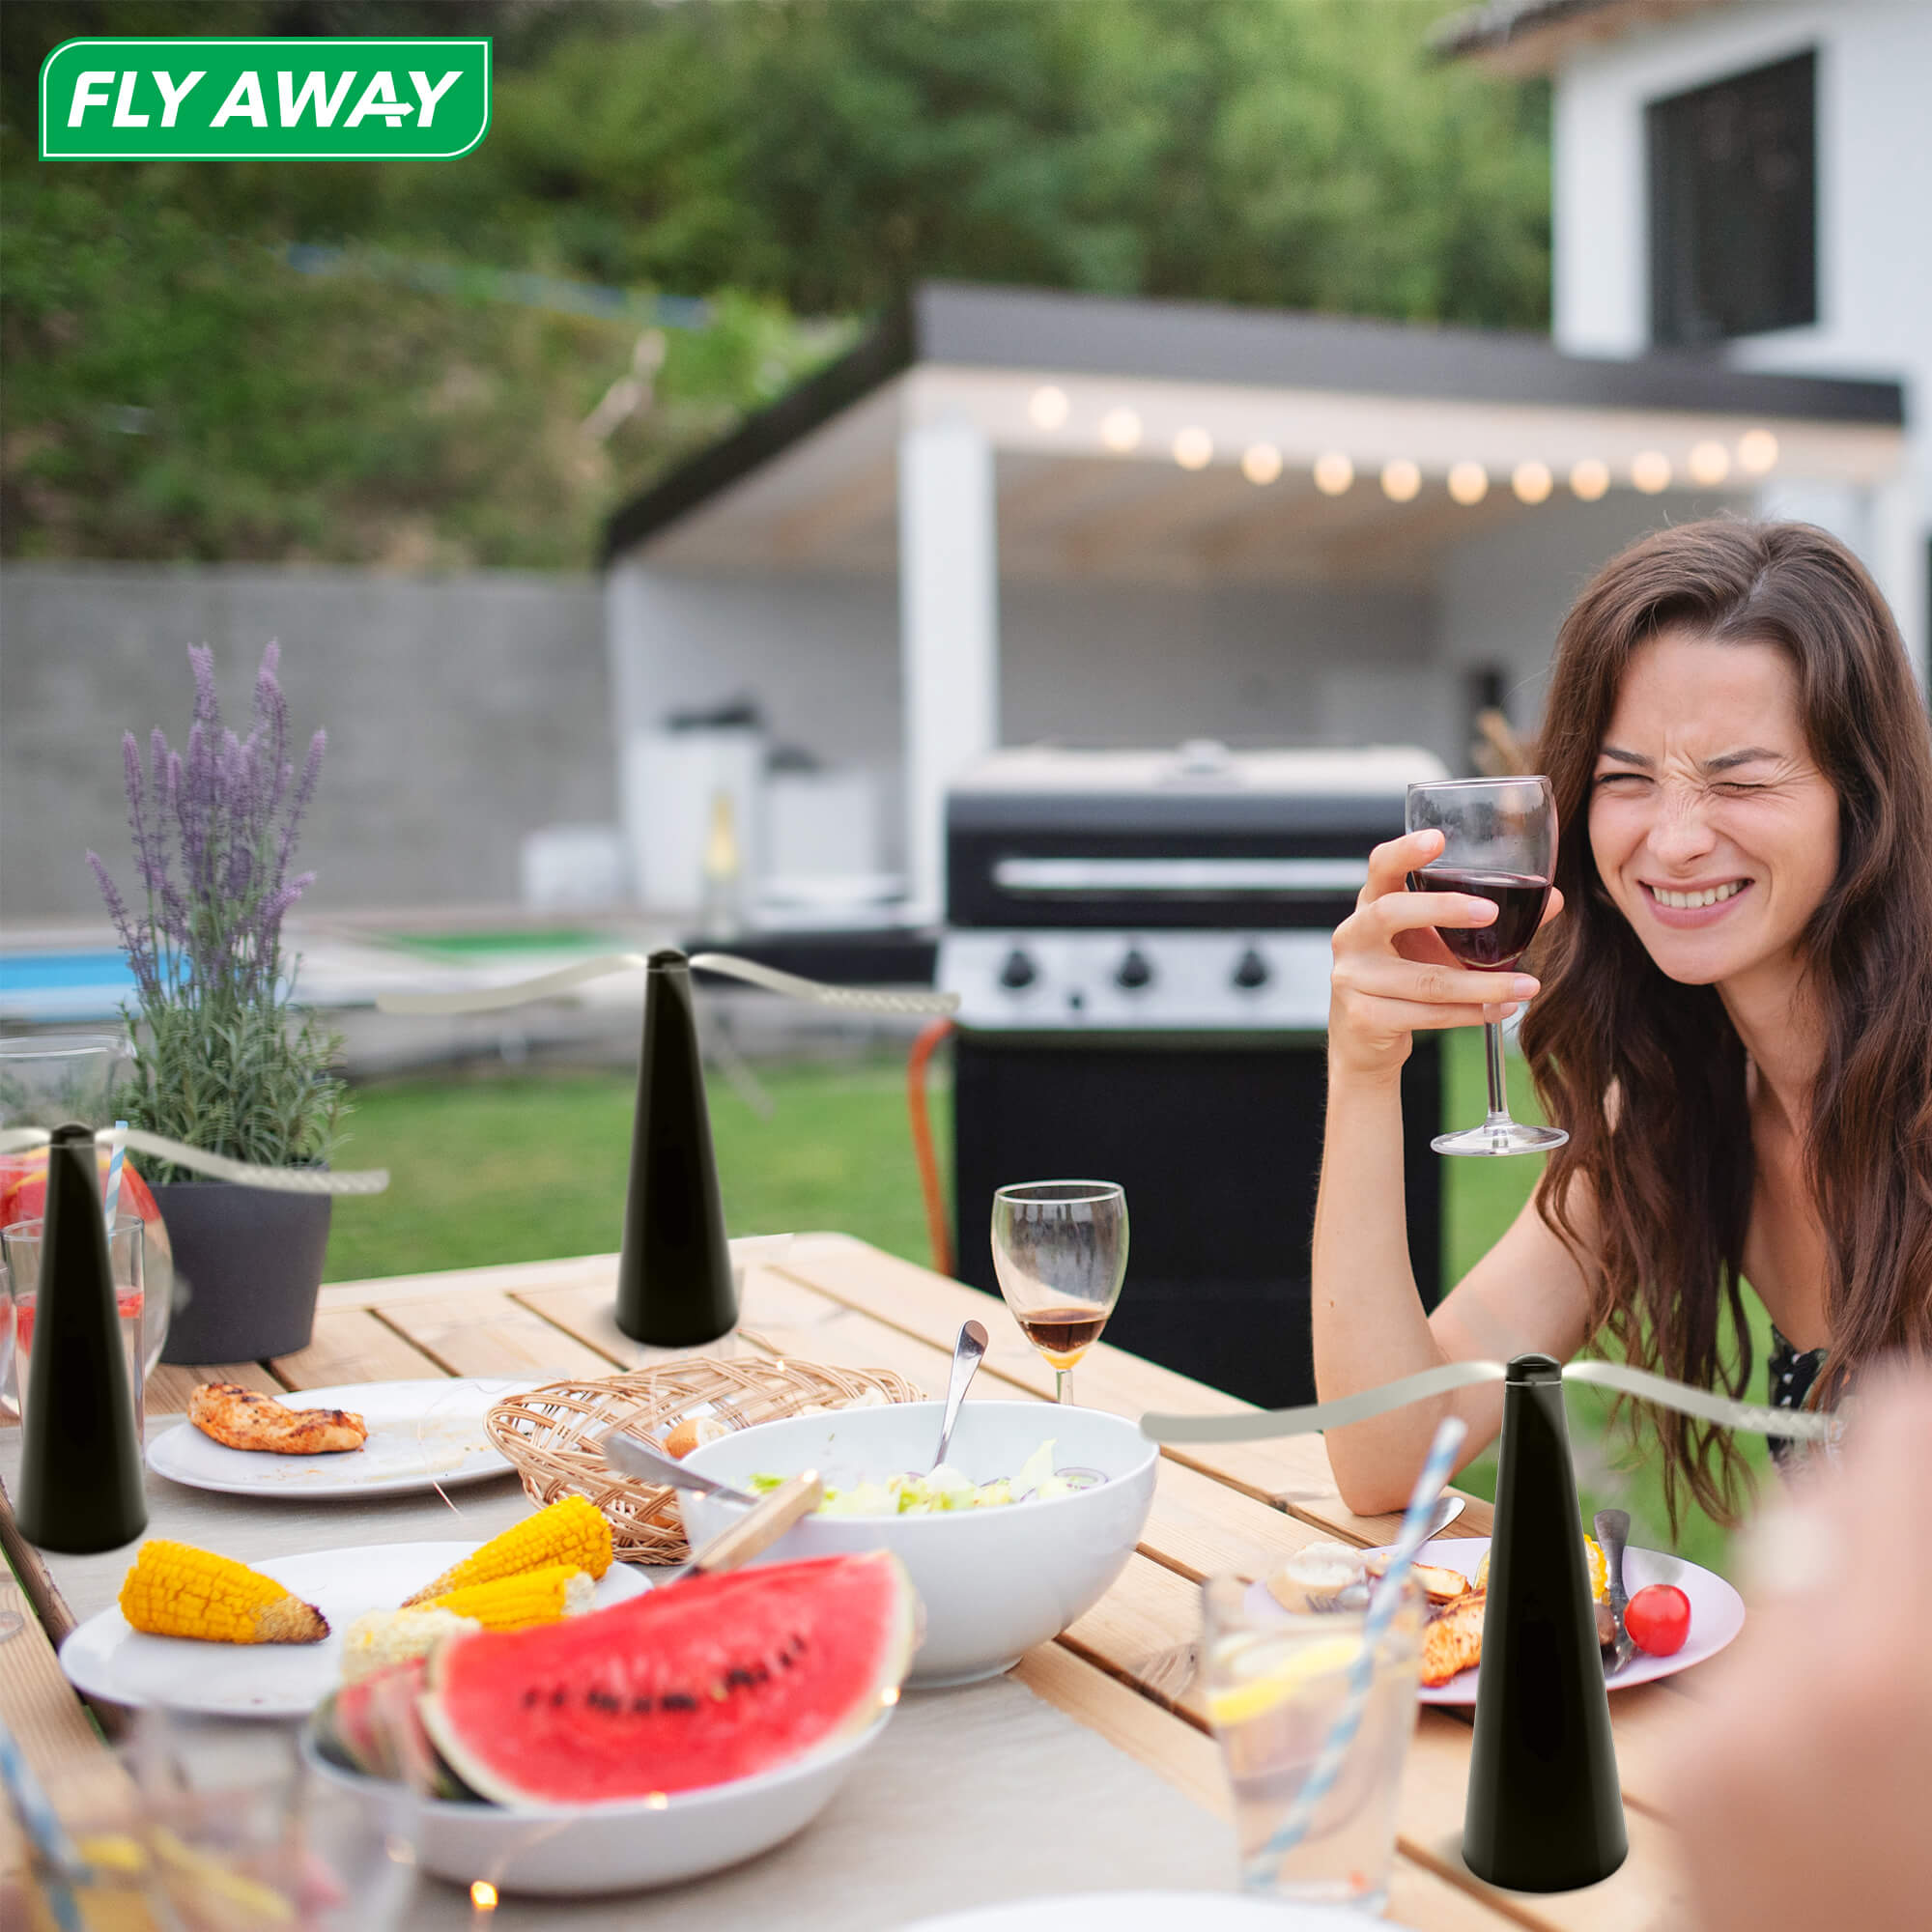 Drinking a glass of wine in a backyard or winery is easy with Fly Away: Elevate winery ambiance with Fly Away, a discreet bug repellent fan ensuring a serene outdoor experience. Safe fan blades, constant speed, and eco-friendly design create an inviting space, free from pests. Perfect for enhancing wine tasting enjoyment amidst the vineyards.